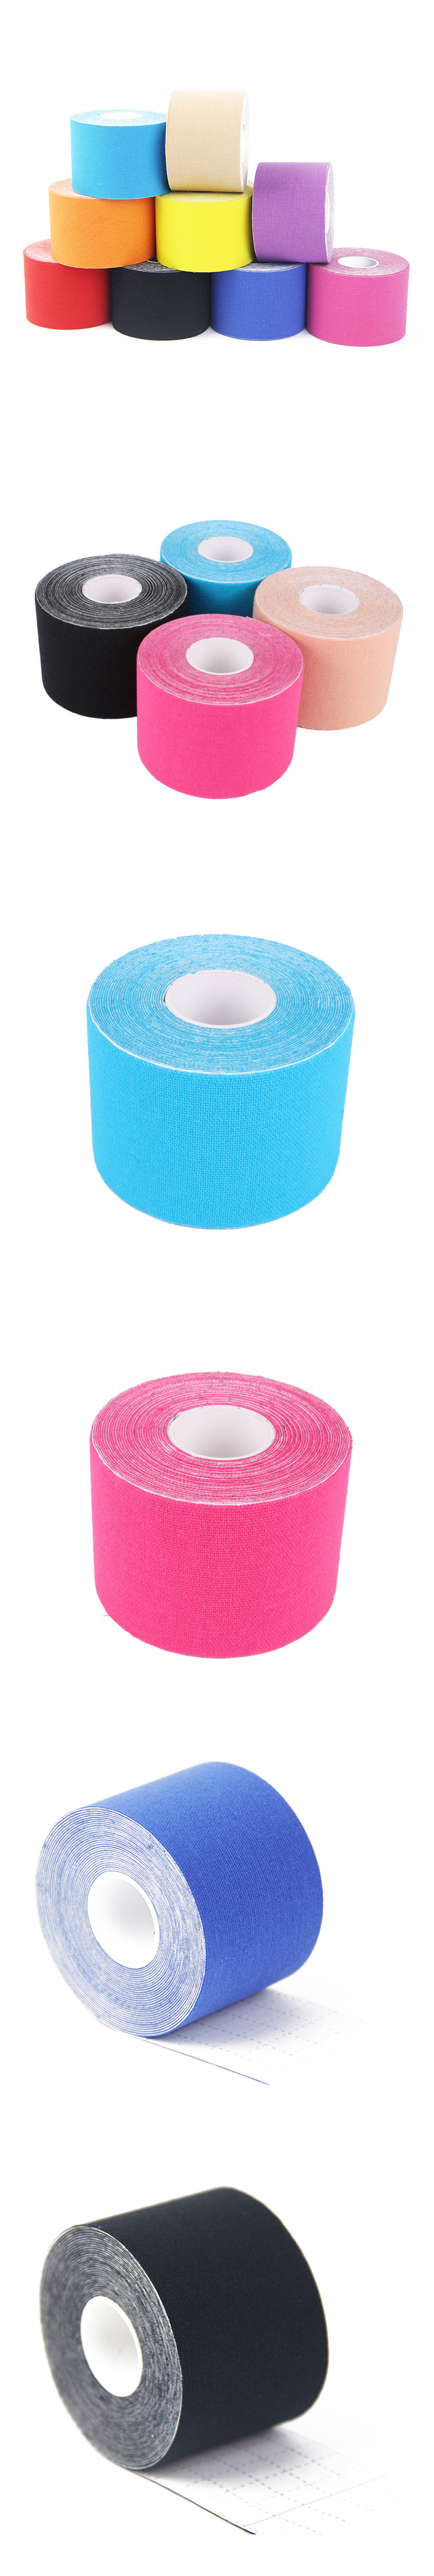 5CM-X-5M-Sports-Fitness-Kinesiology-Tape-Muscle-Care-Elastic-Adhesive-Bandage-924502